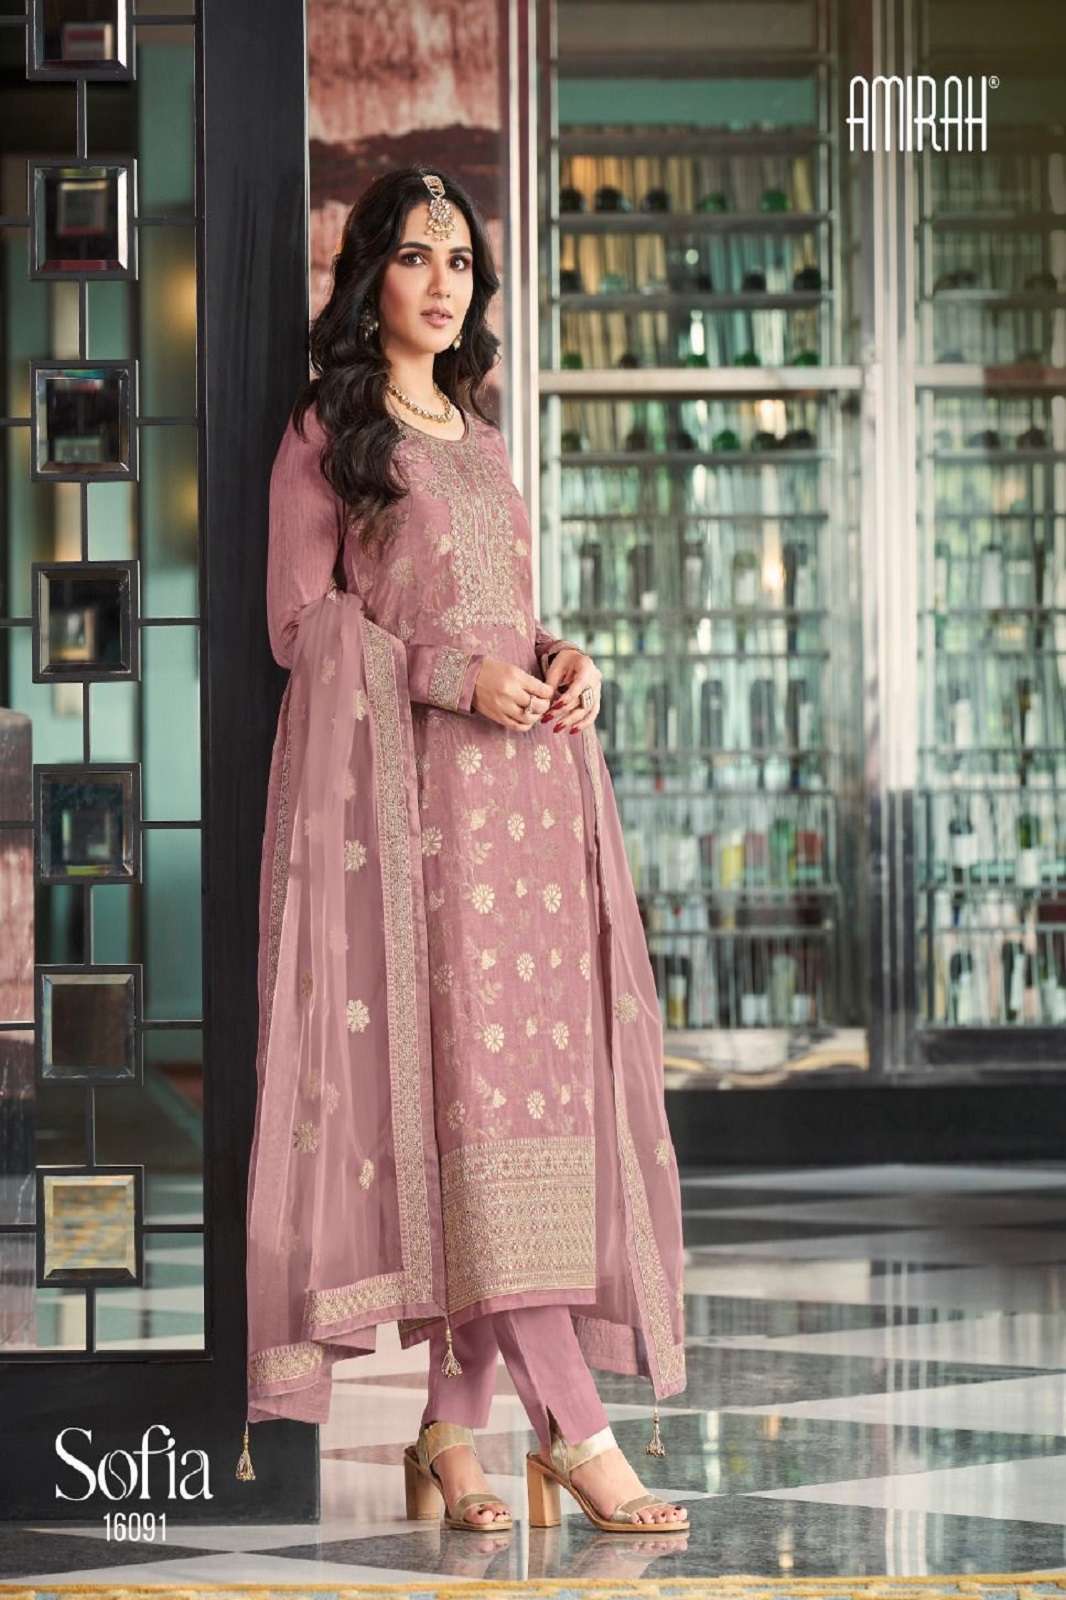 Amirah Sofia Traditional Partywear Festival Salwar Suit Collection